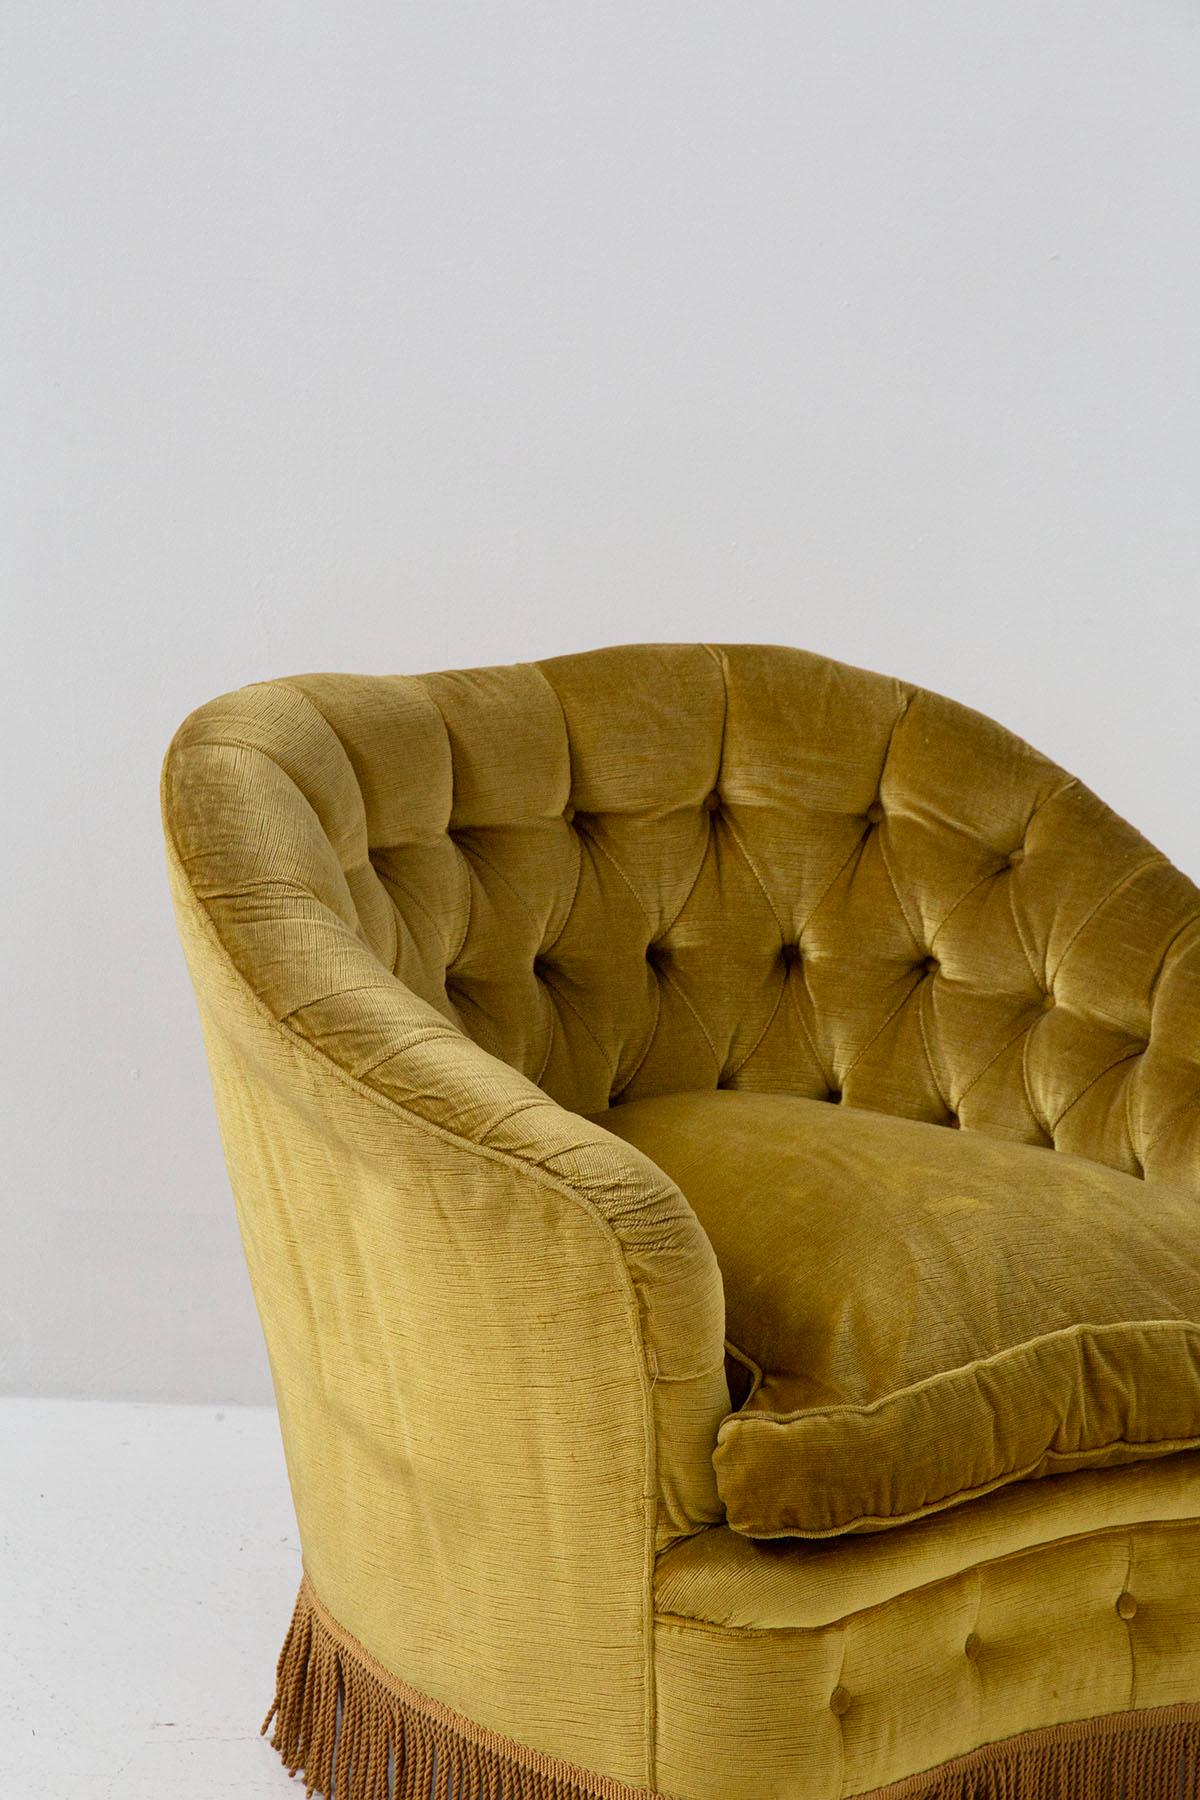 Beautiful pair of armchairs attributed to the great designer Gio Ponti for the Italian manufacturer Casa e Giardino in the 1950s. The fabric is an original golden yellow velvet of the time.
The internal structure is made of a beautiful solid wood